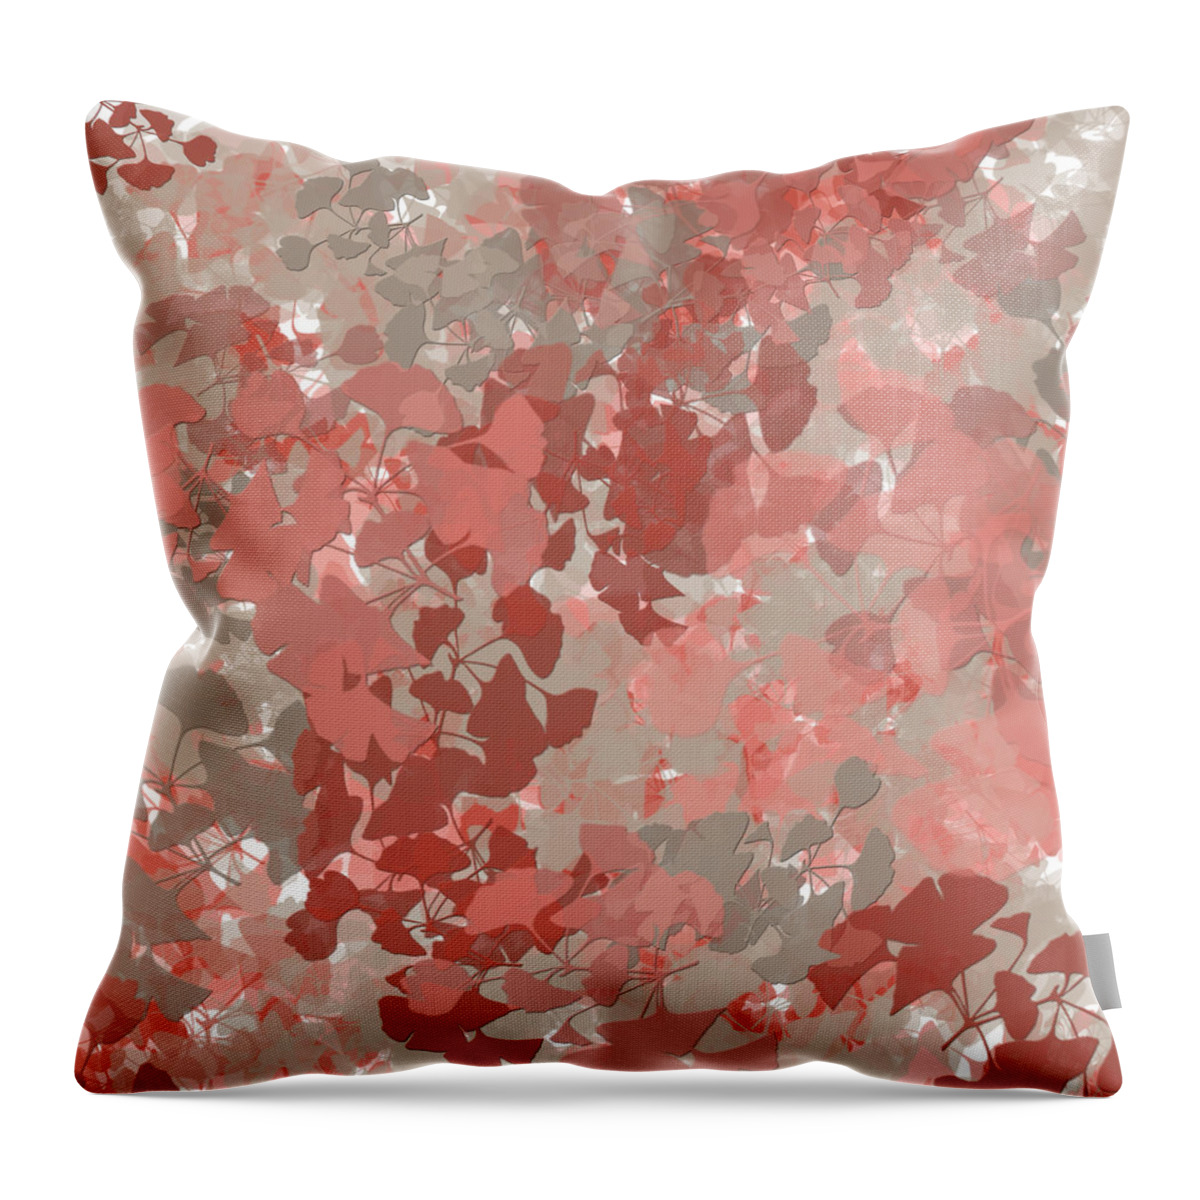 Ginkgo Leaves Throw Pillow featuring the painting Ginkgo Leaves by Bonnie Bruno